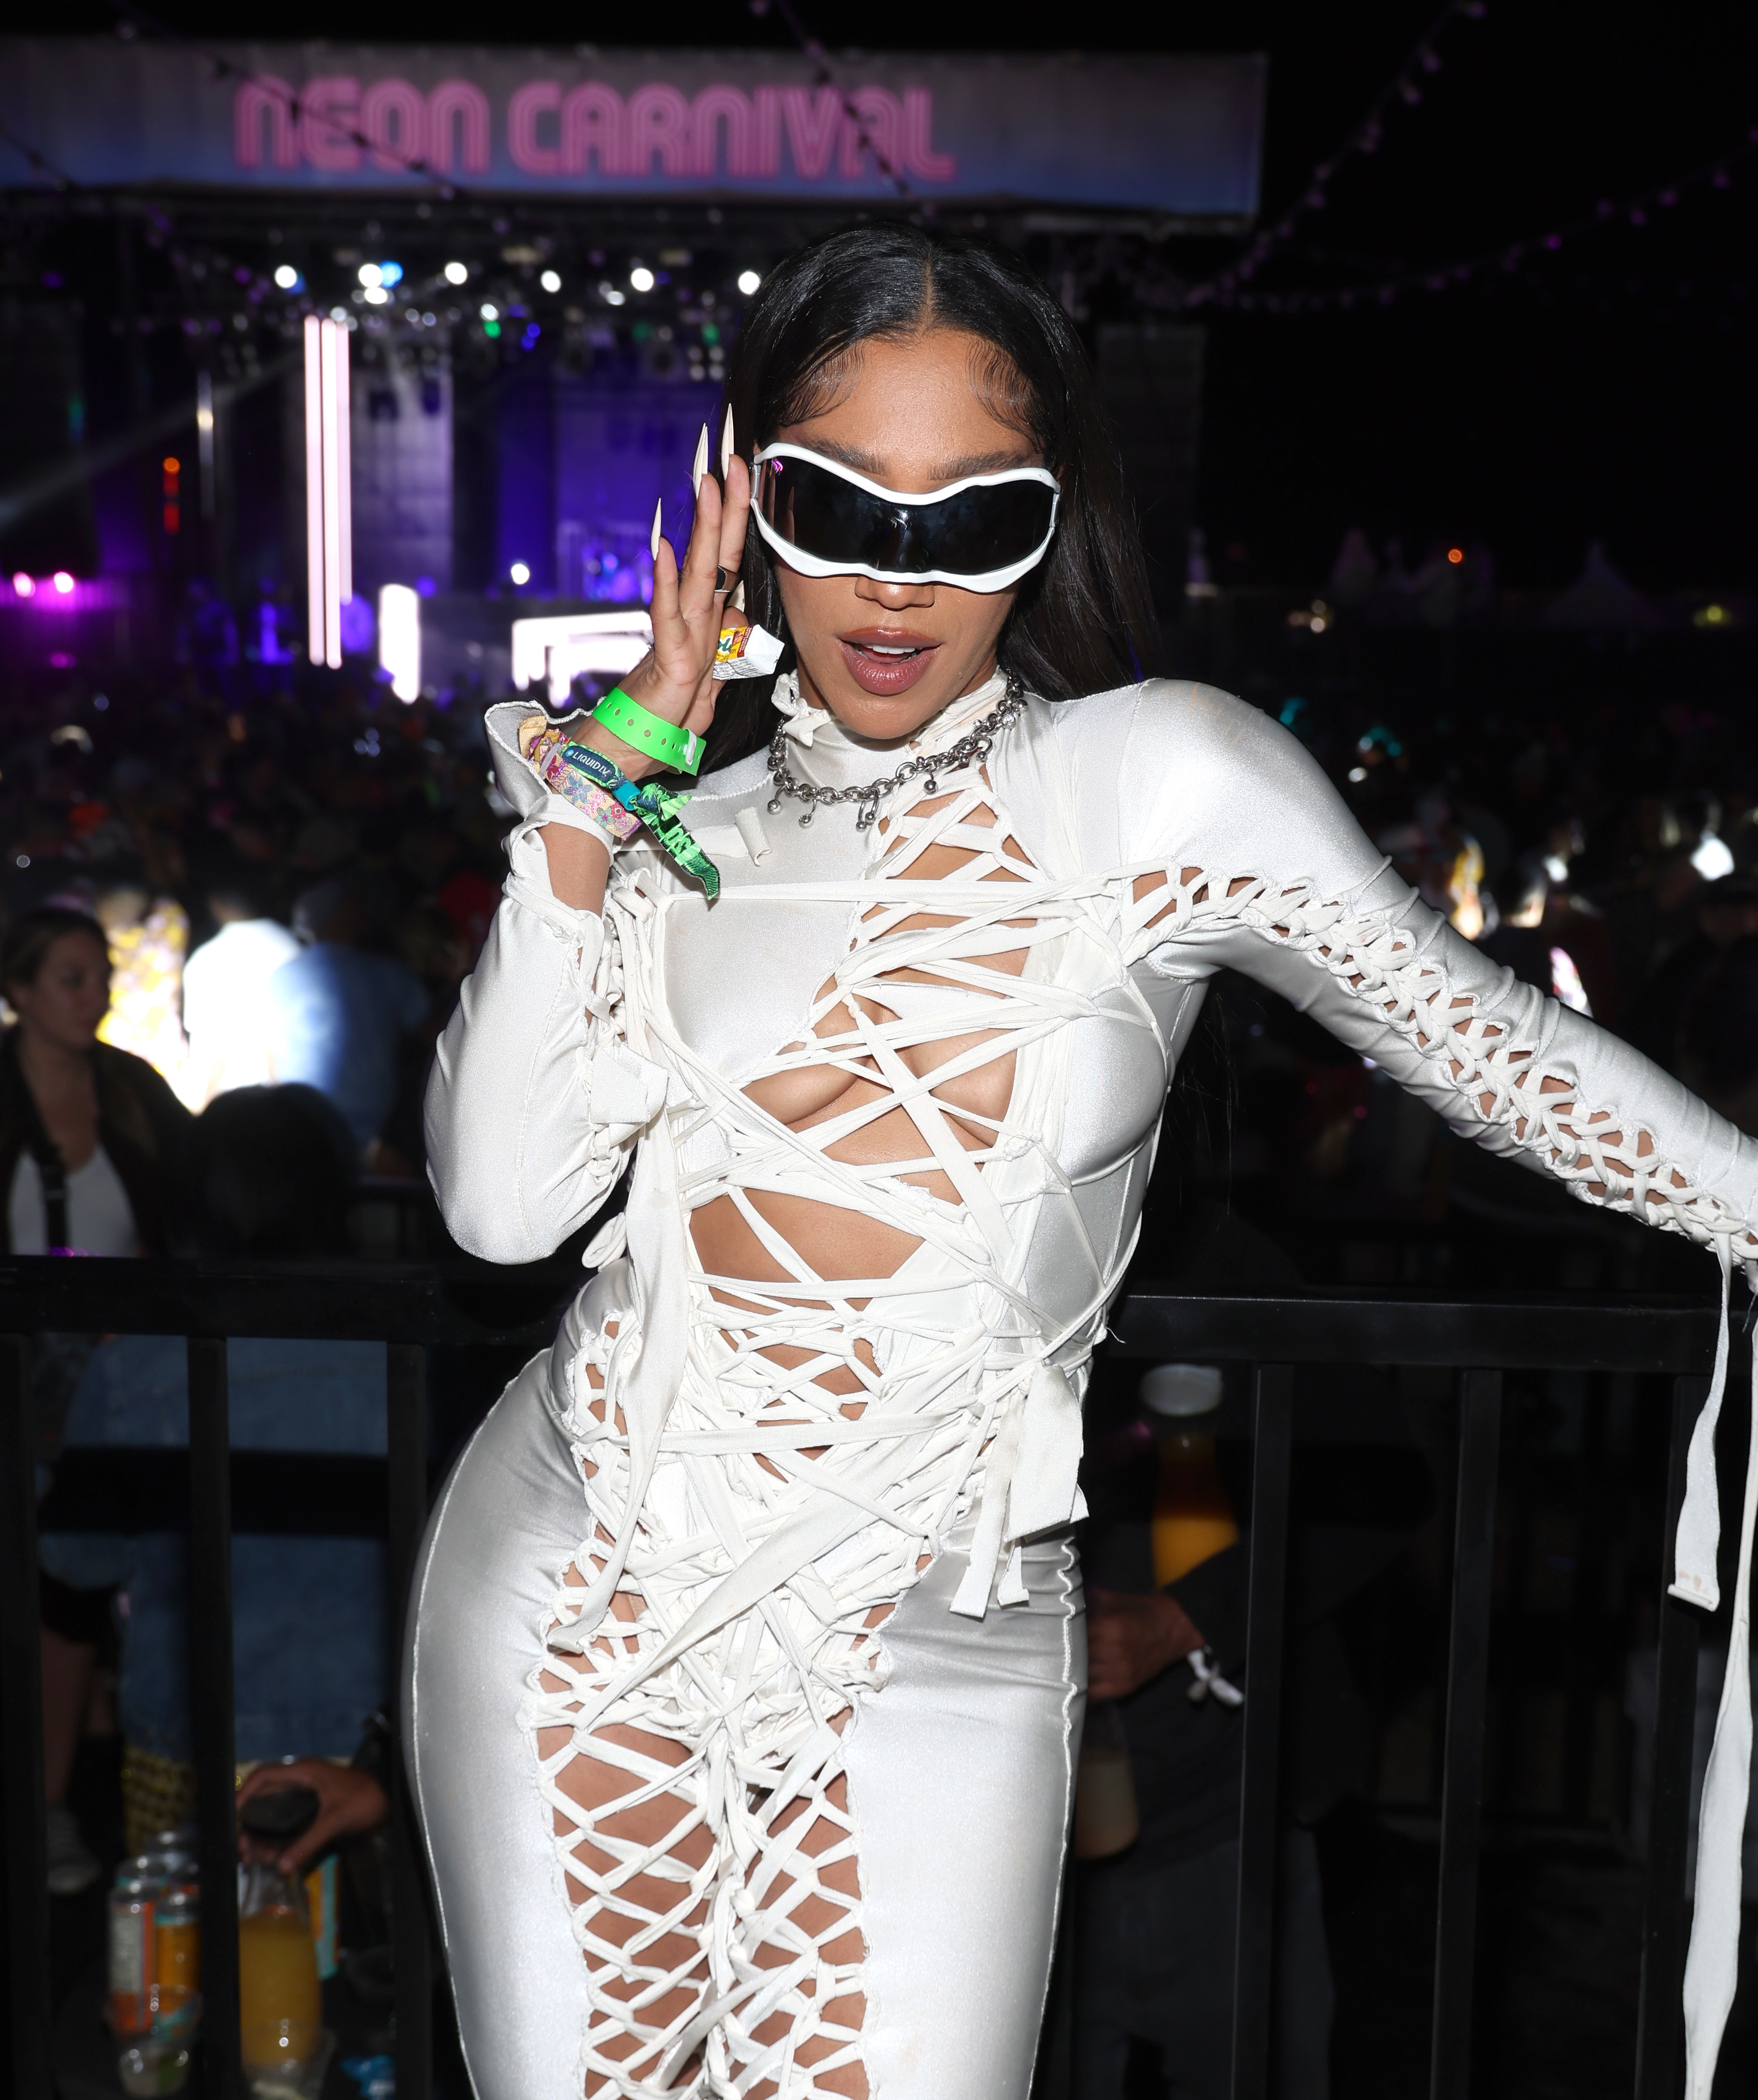 Person in a white cut-out outfit and sunglasses posing with a peace sign gesture